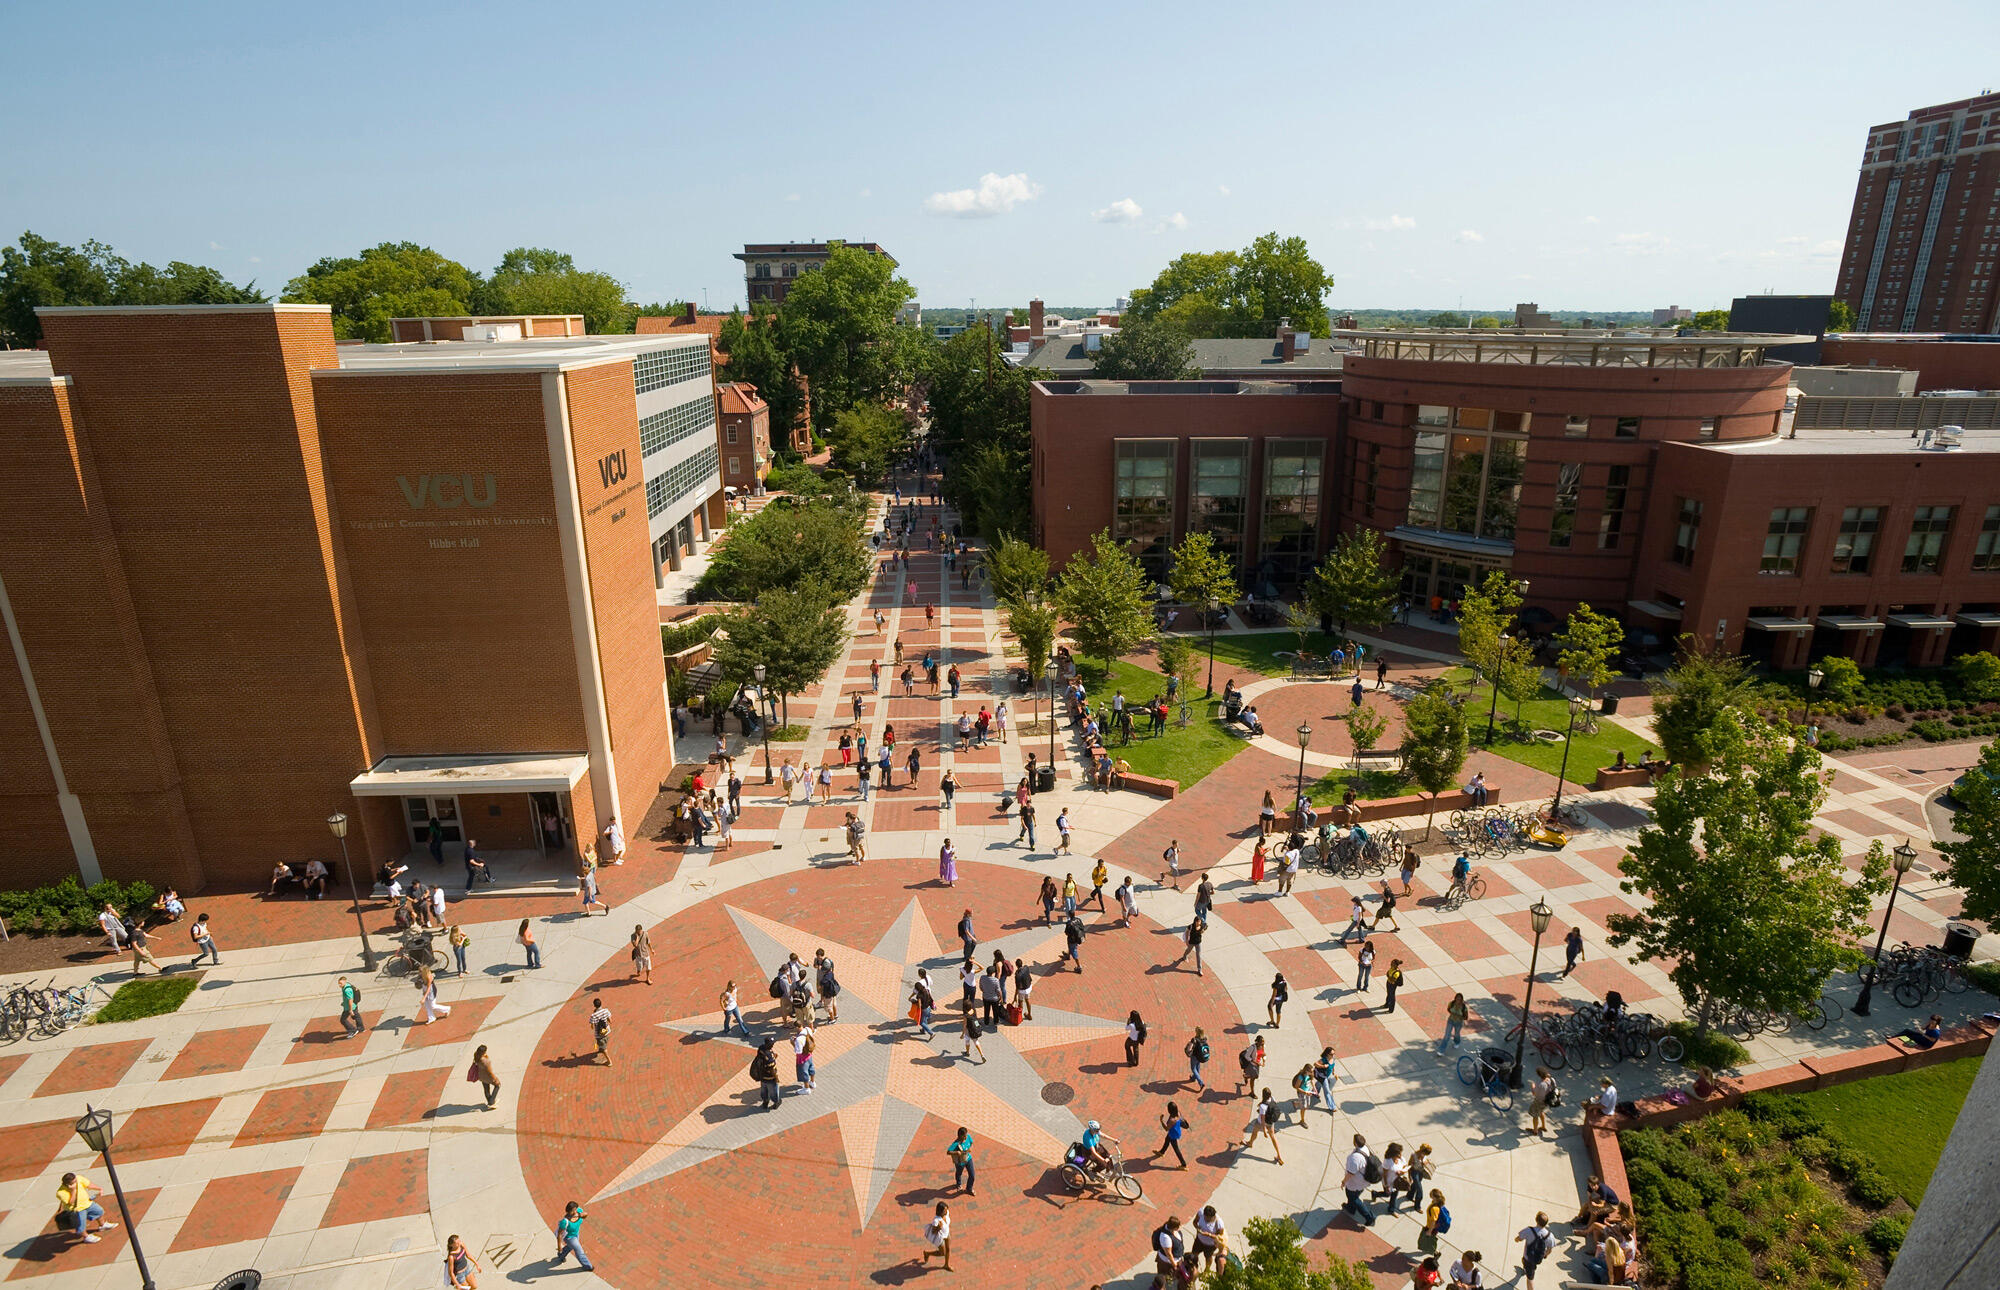 Image from above of the VCU Compass, a courtyard area with students passing through.